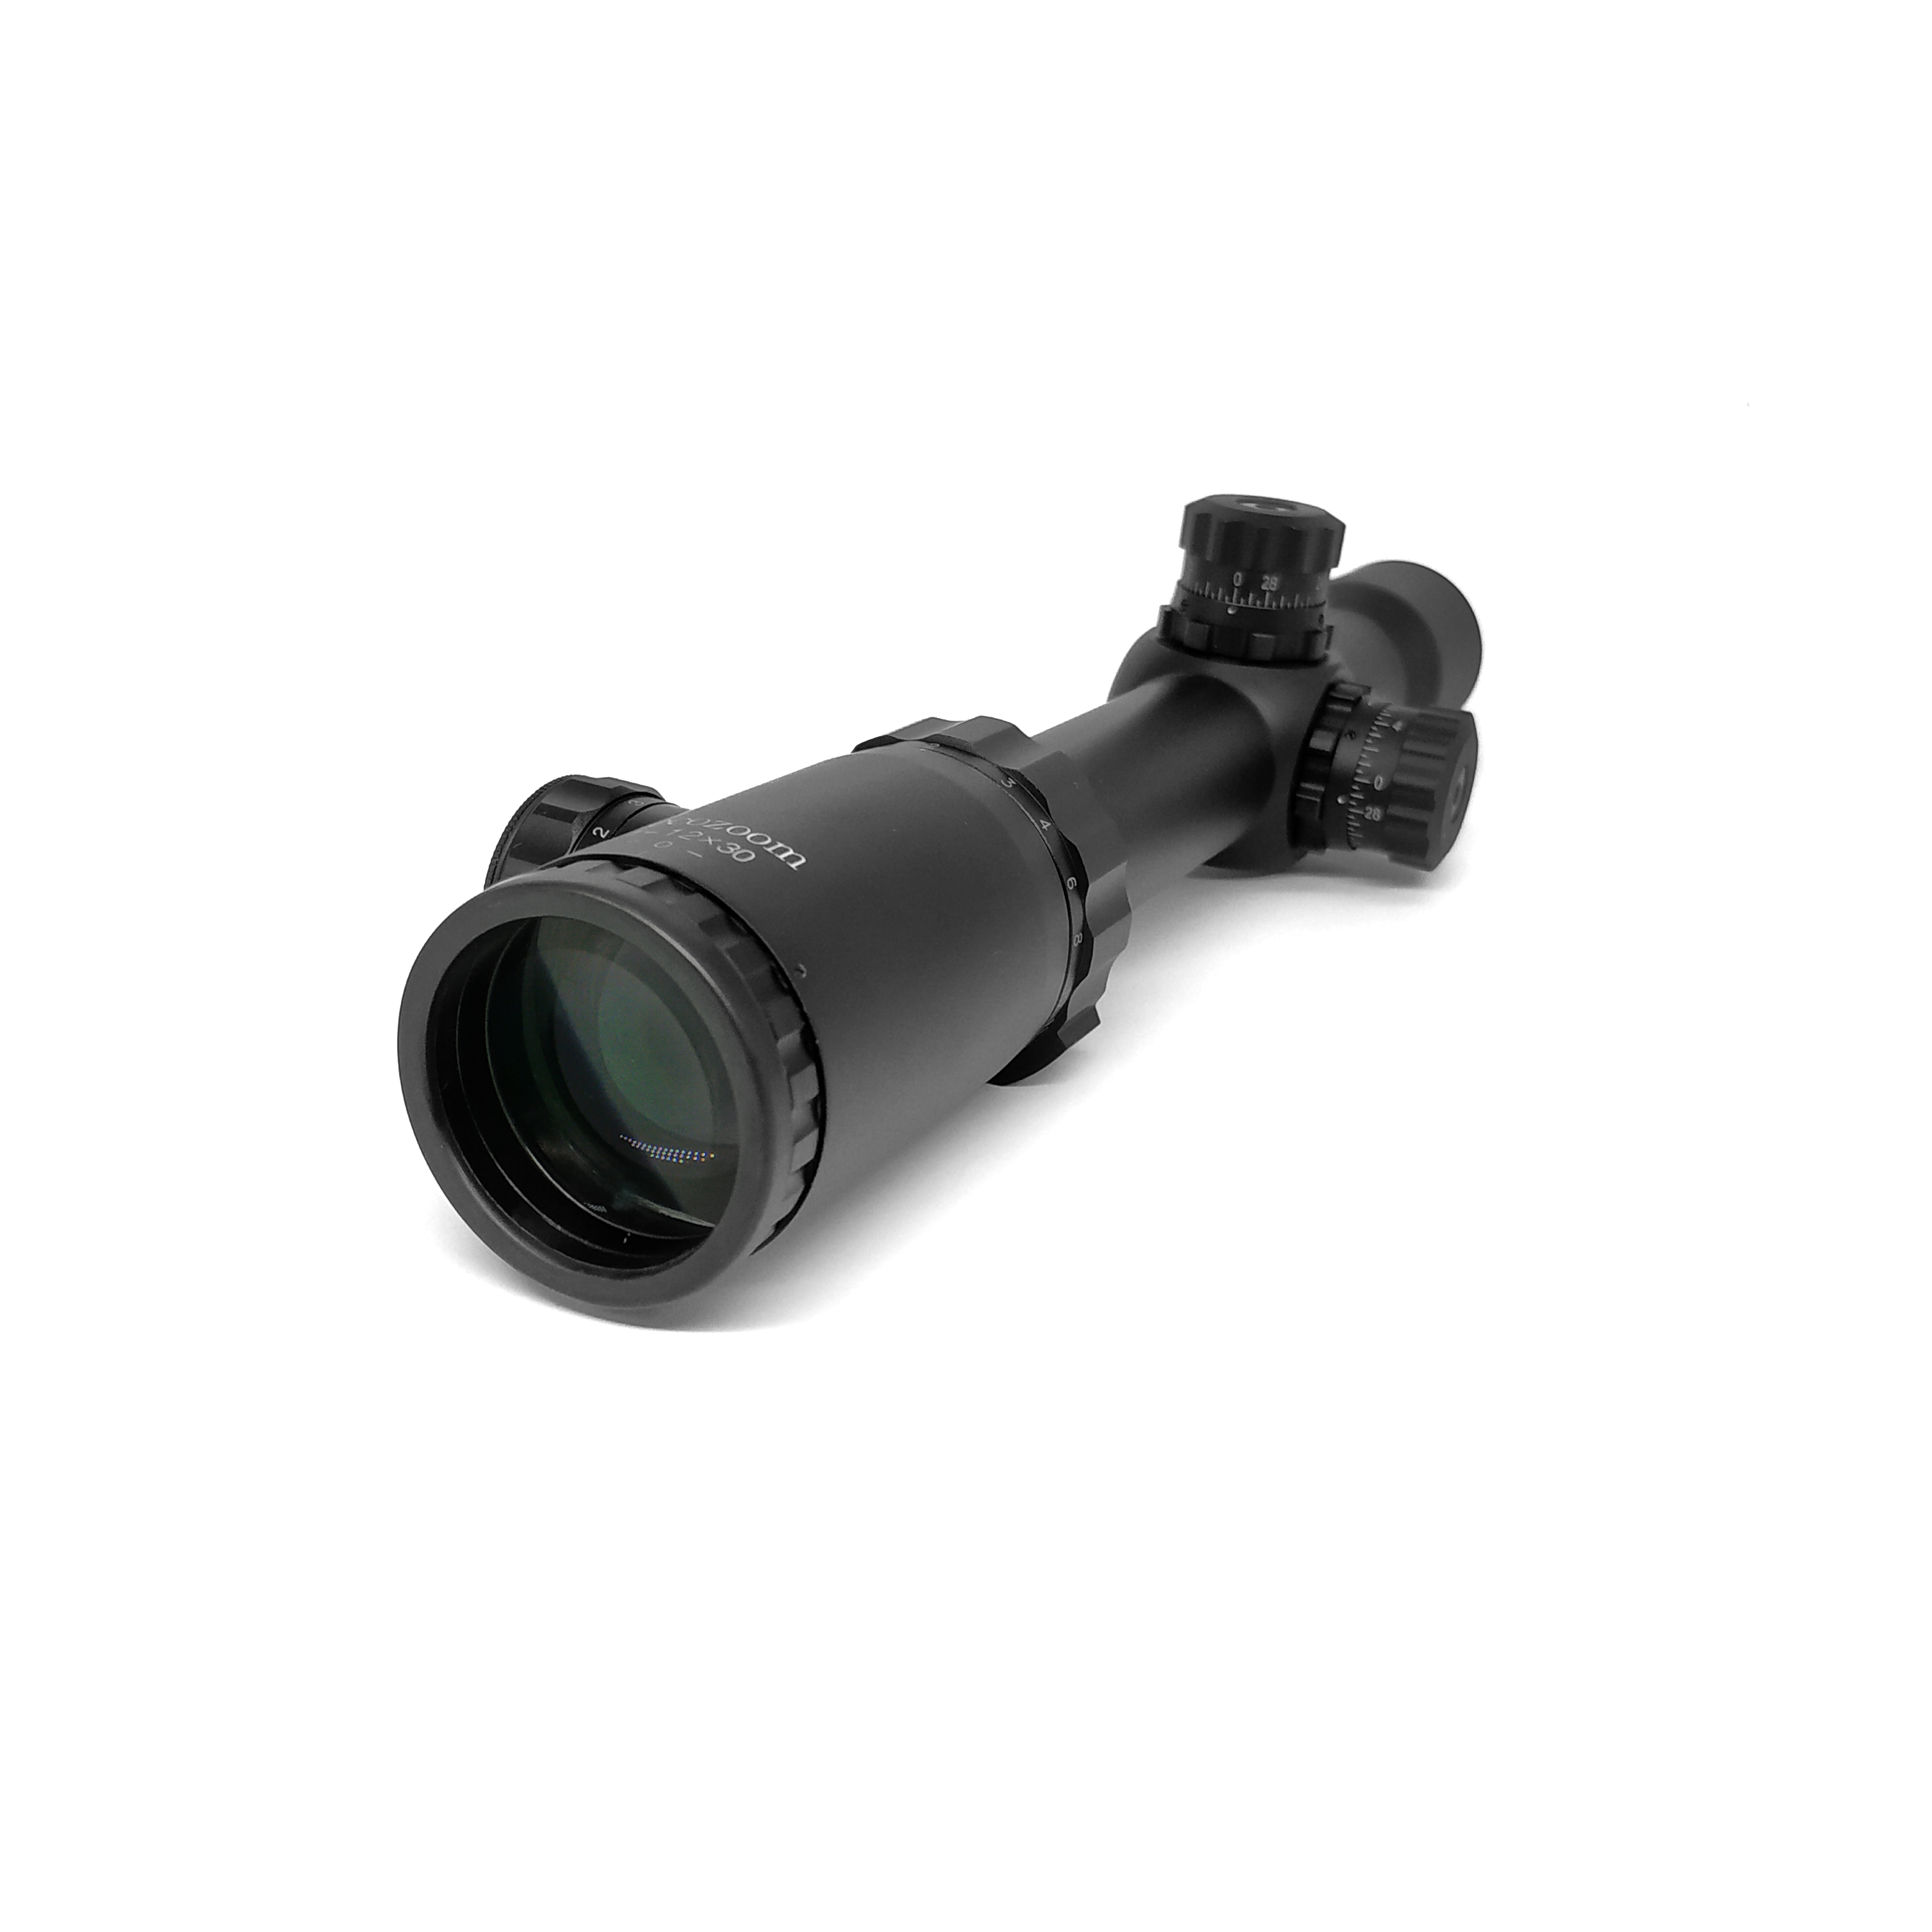 Wide Field Long Eye relief illuminated reticle FFP 1-12X30 rifle scope for Hunting